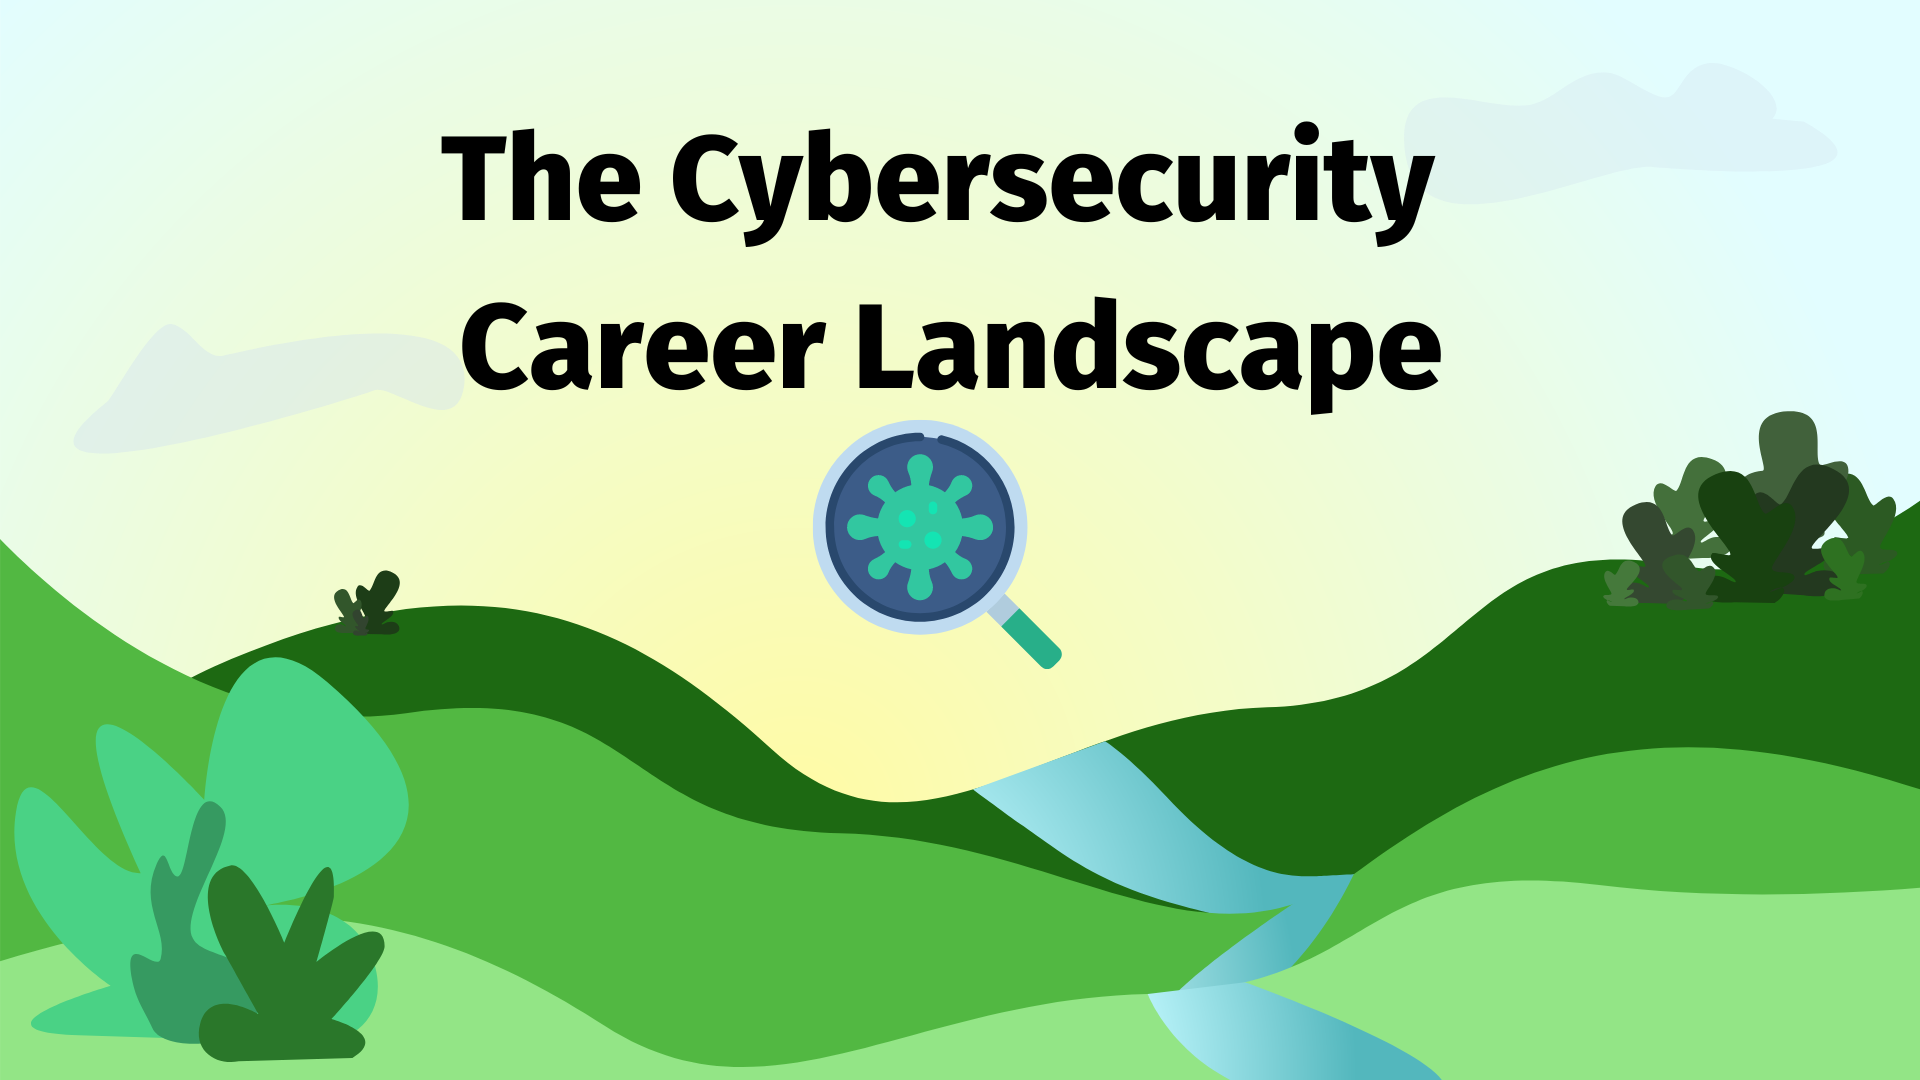 The Cybersecurity Career Landscape